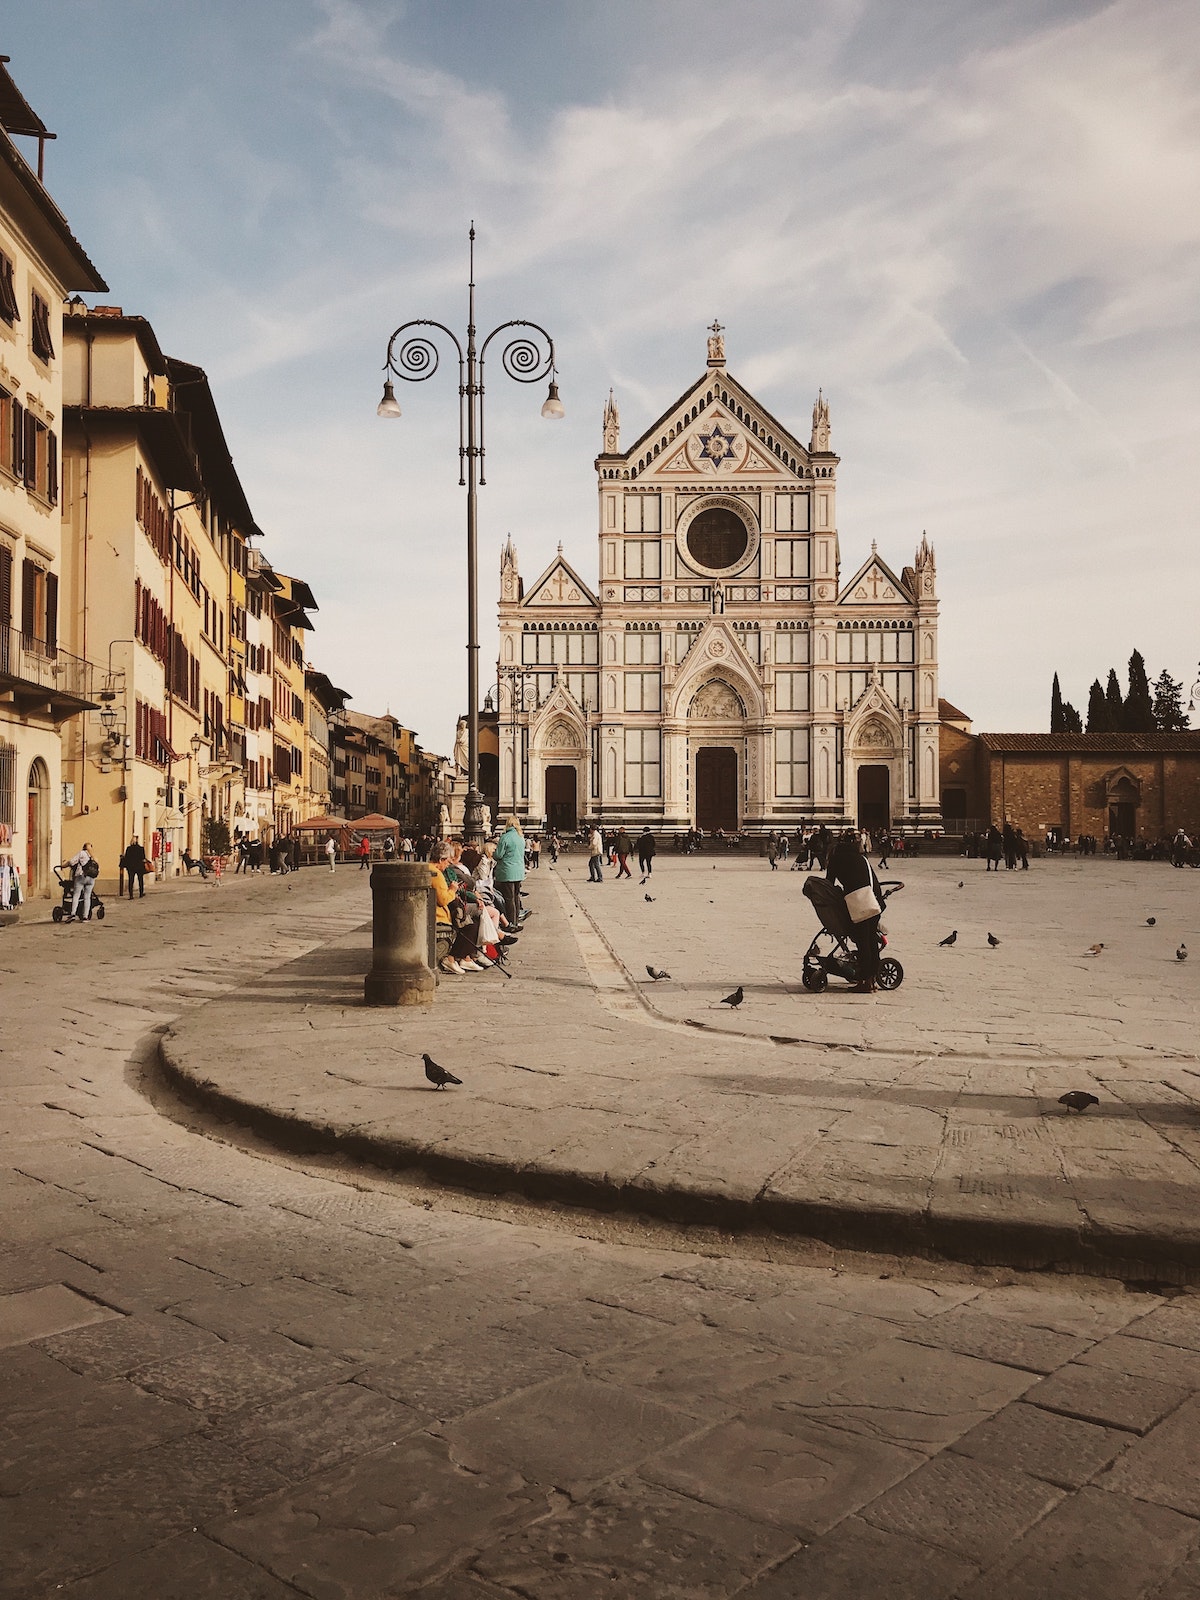 Church in Florence, Italy in front of a wide pedestrianized square